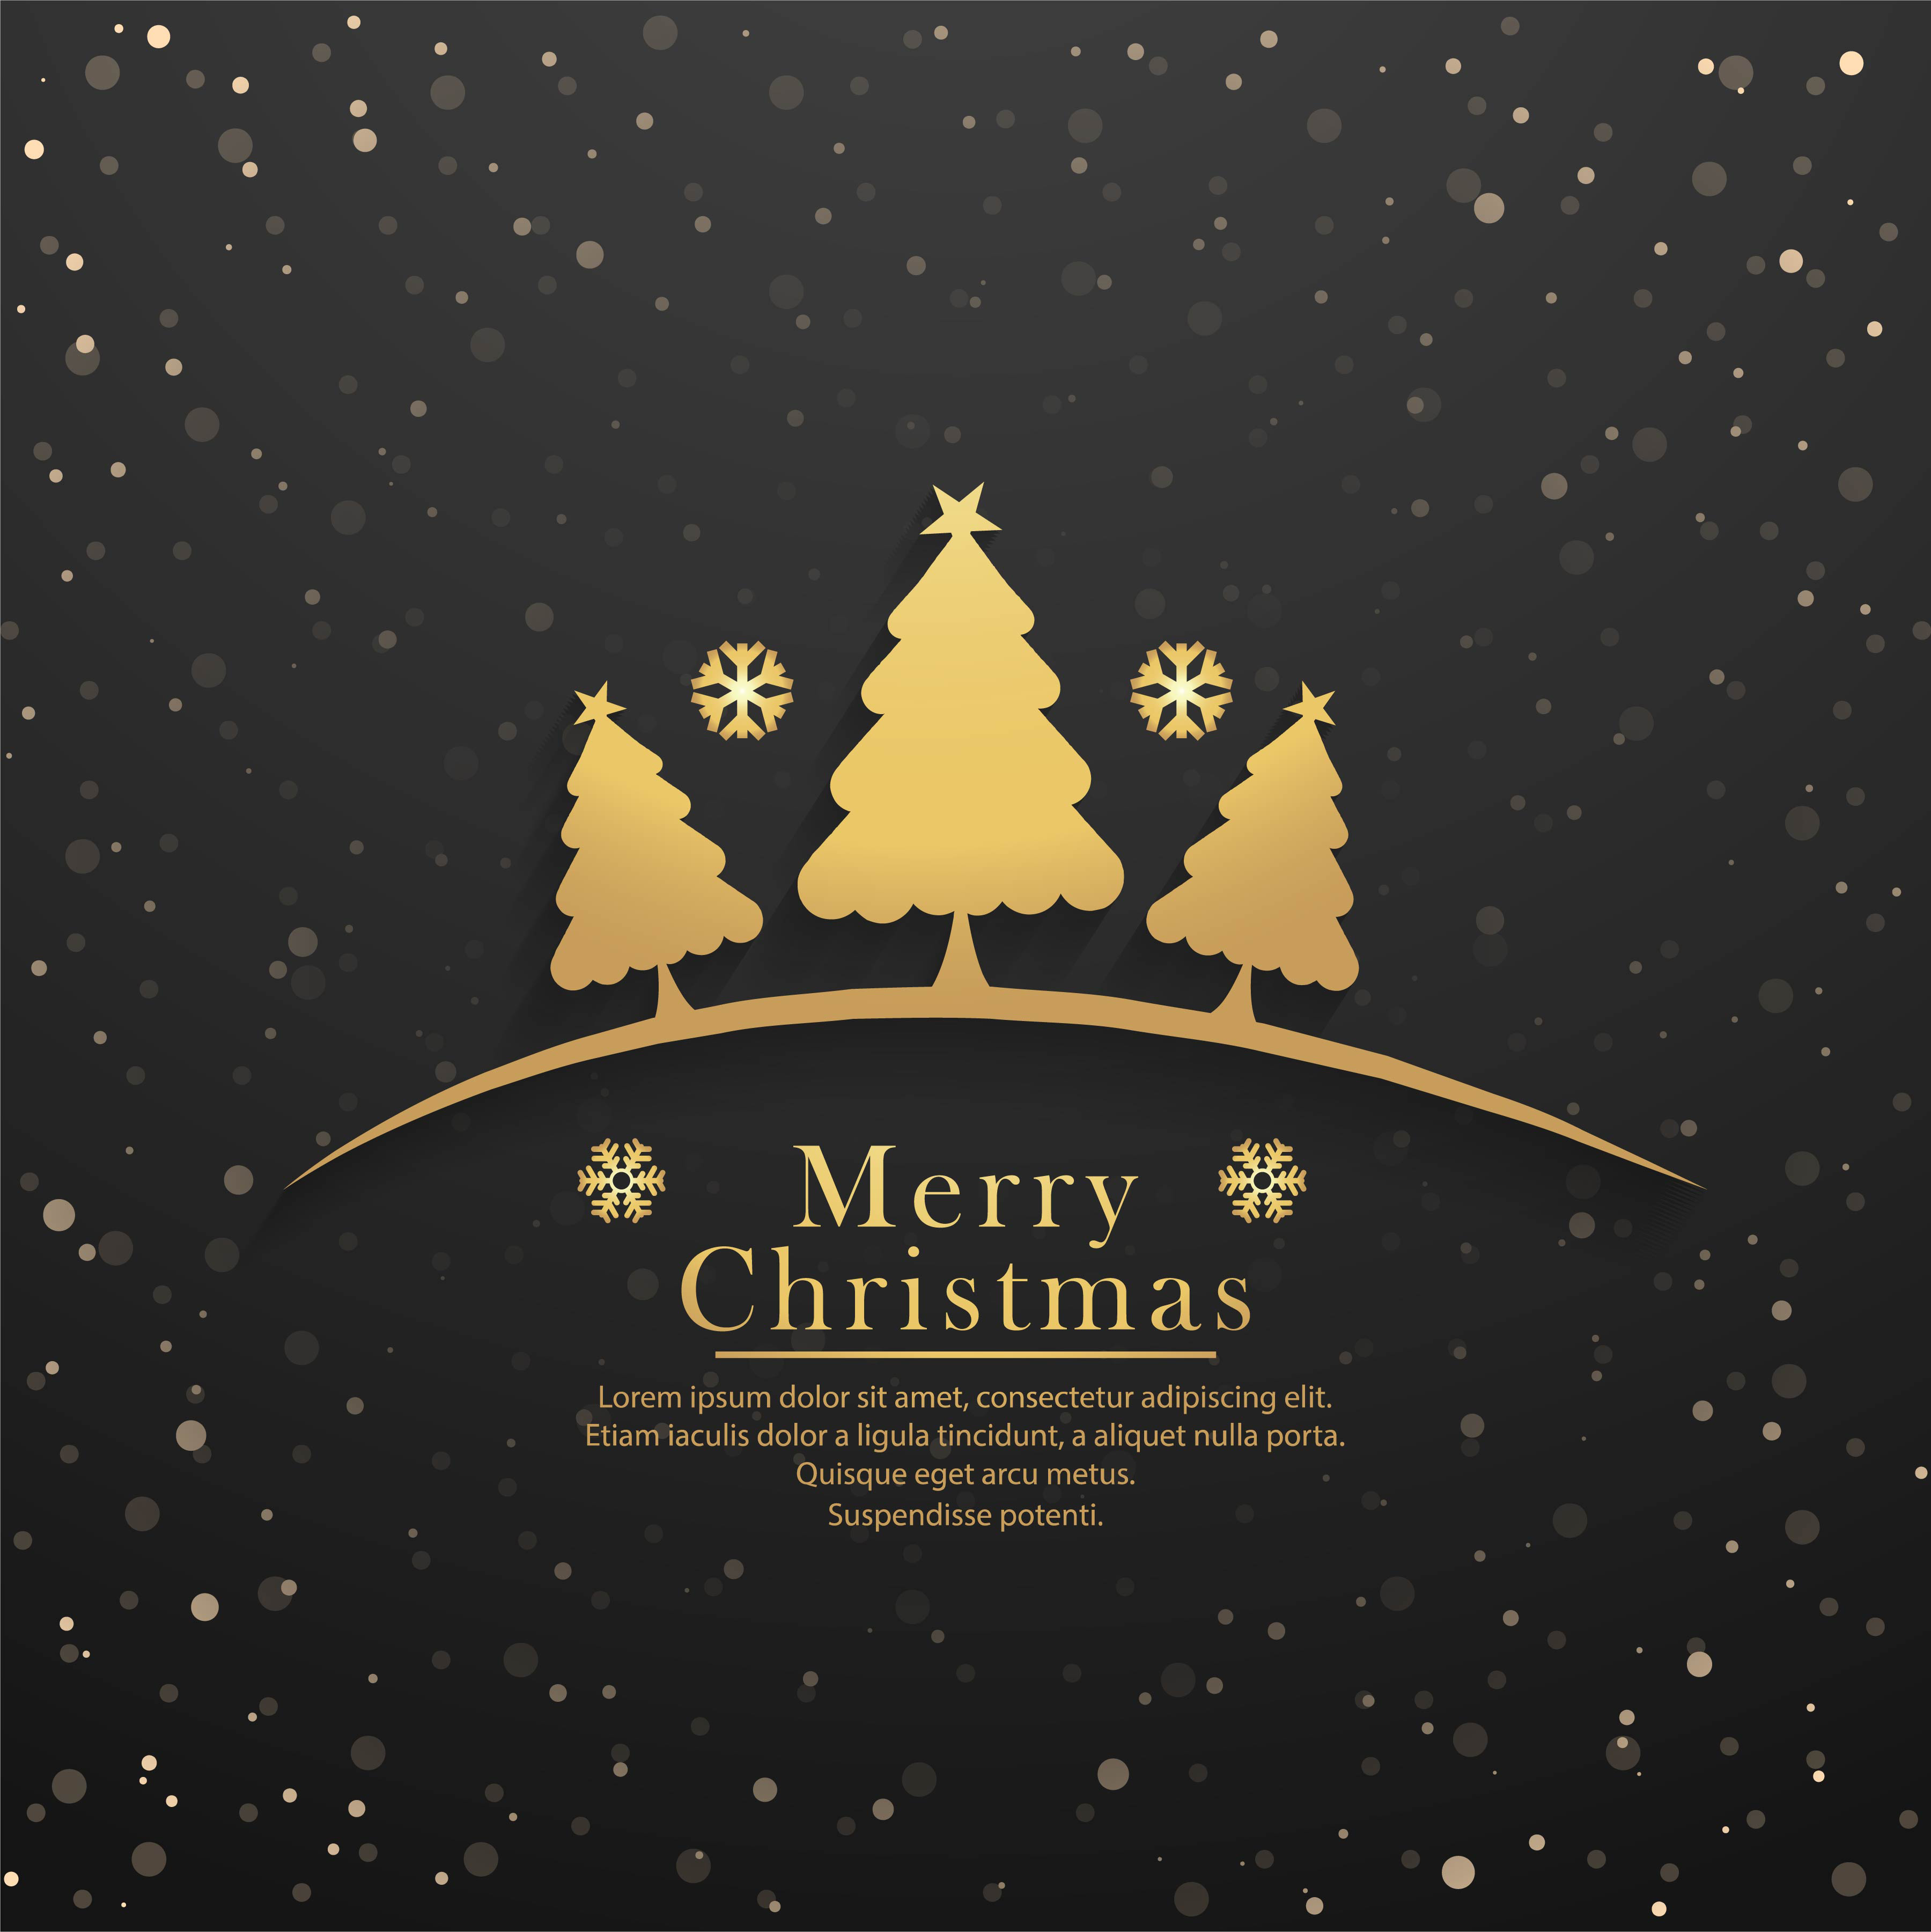 Beautiful merry christmas card background - Download Free ...